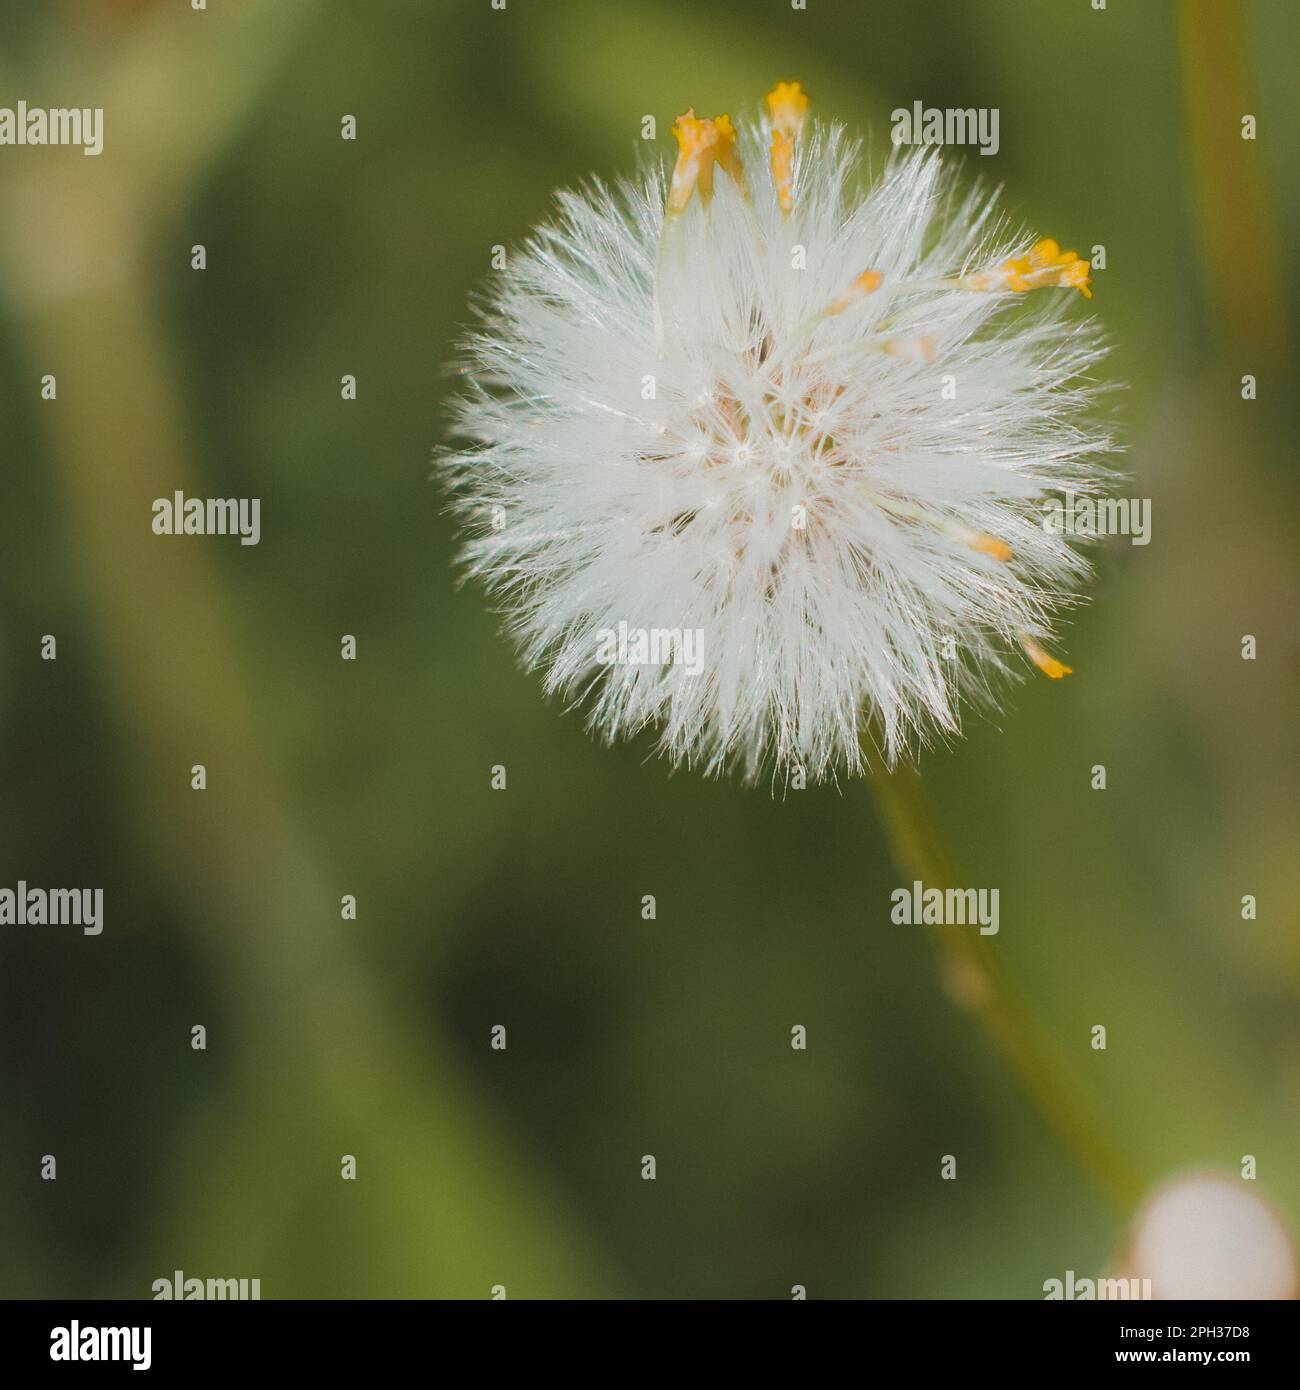 white and yellow fluffy dandelion flower Stock Photo